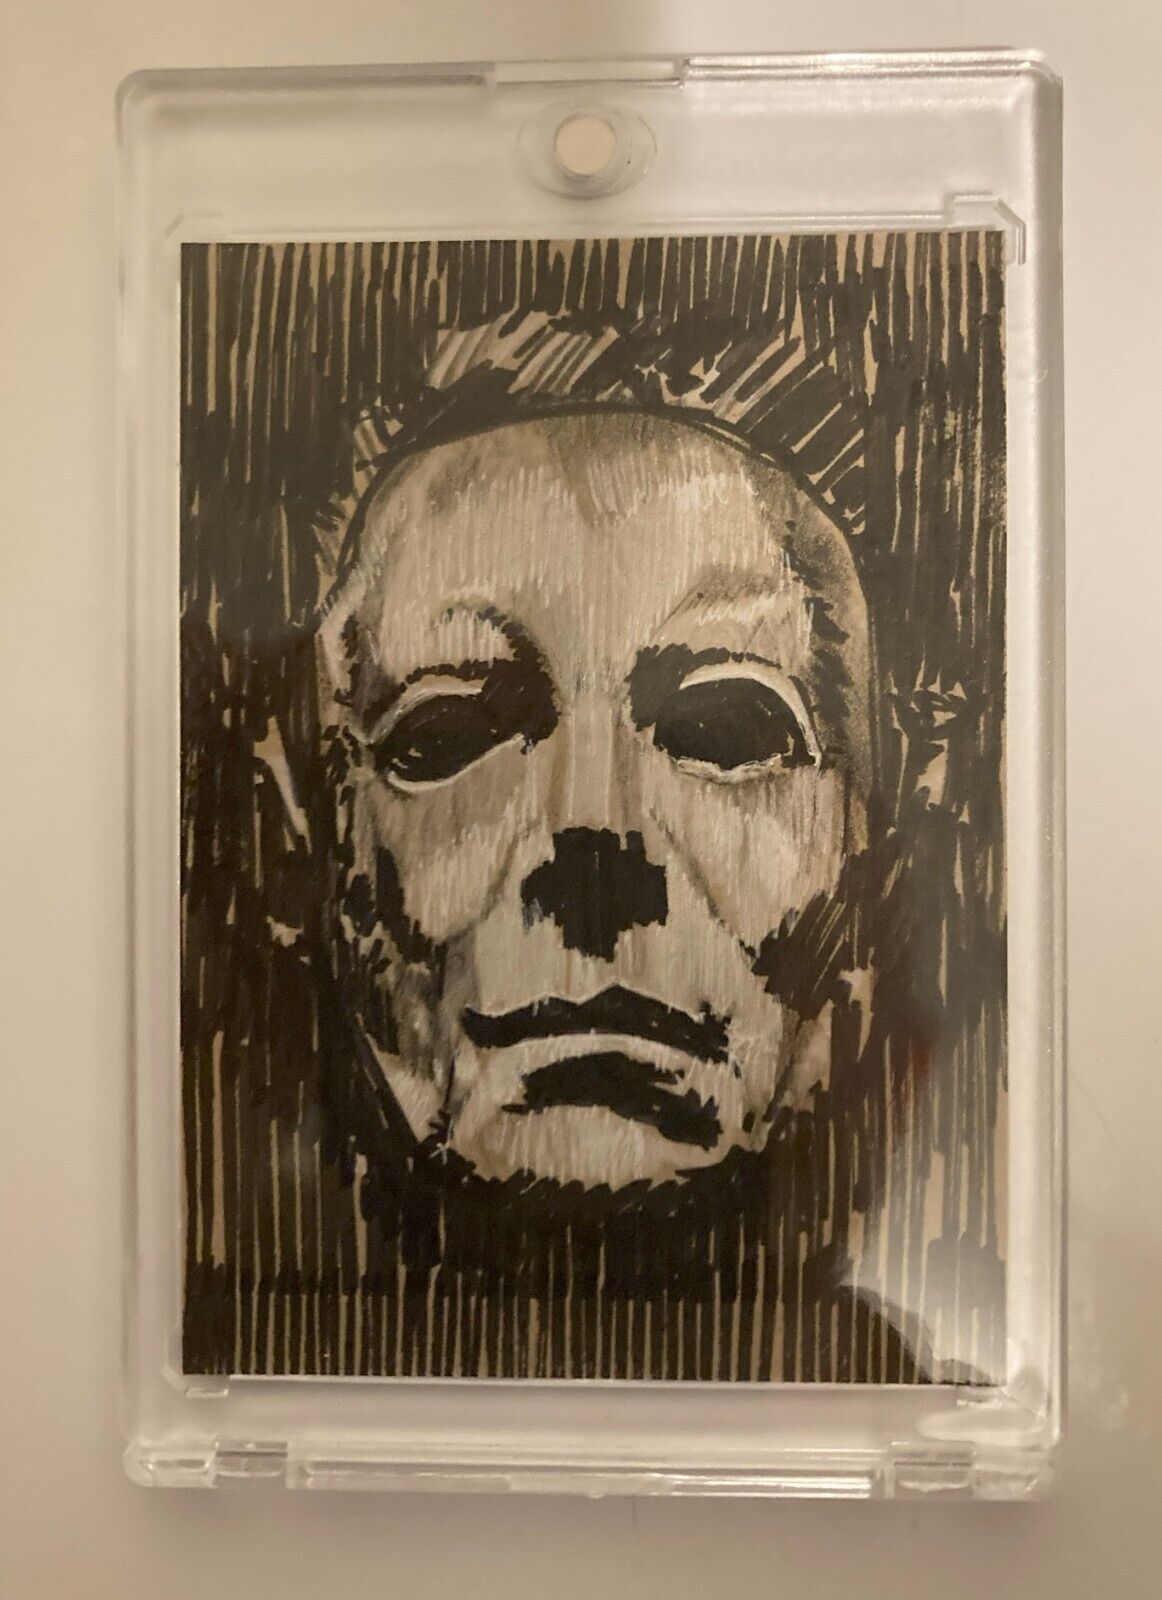 HALLOWEEN MICHAEL MYERS 1/1 SKETCH CARD BY TOPPS ARTIST PLEAK FRIGHT RAGS AUTO